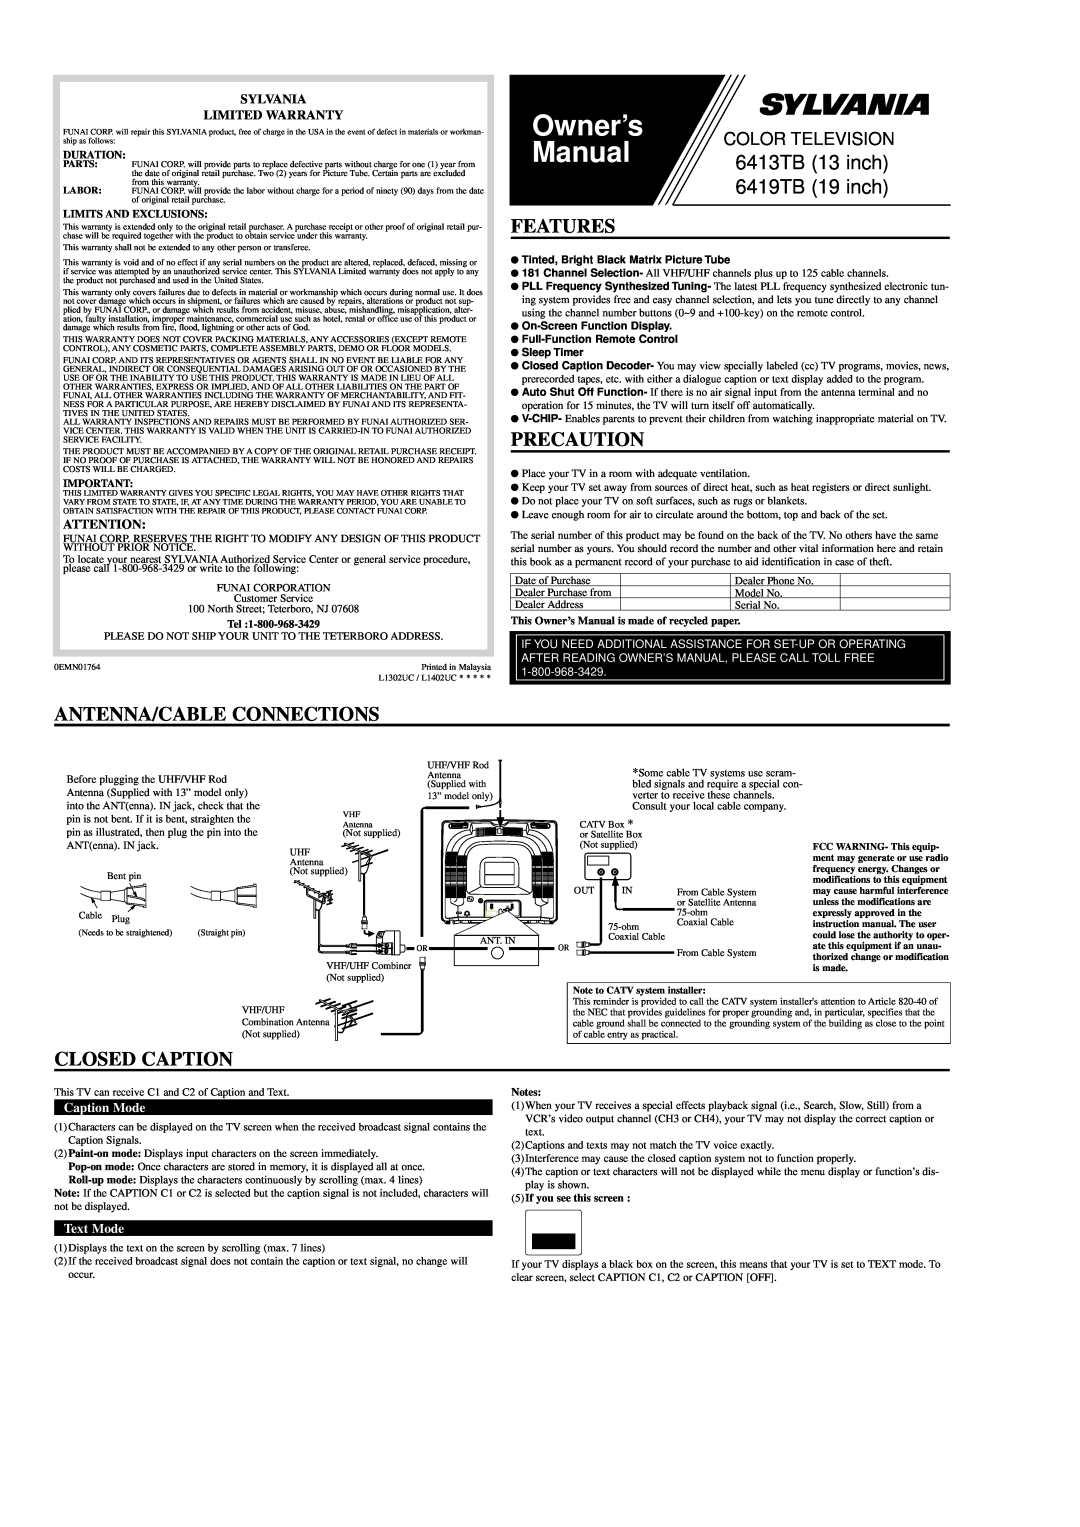 Sylvania 6413TB, 6419TB owner manual Features, Precaution, Antenna/Cable Connections, Closed Caption, Caption Mode, Manual 